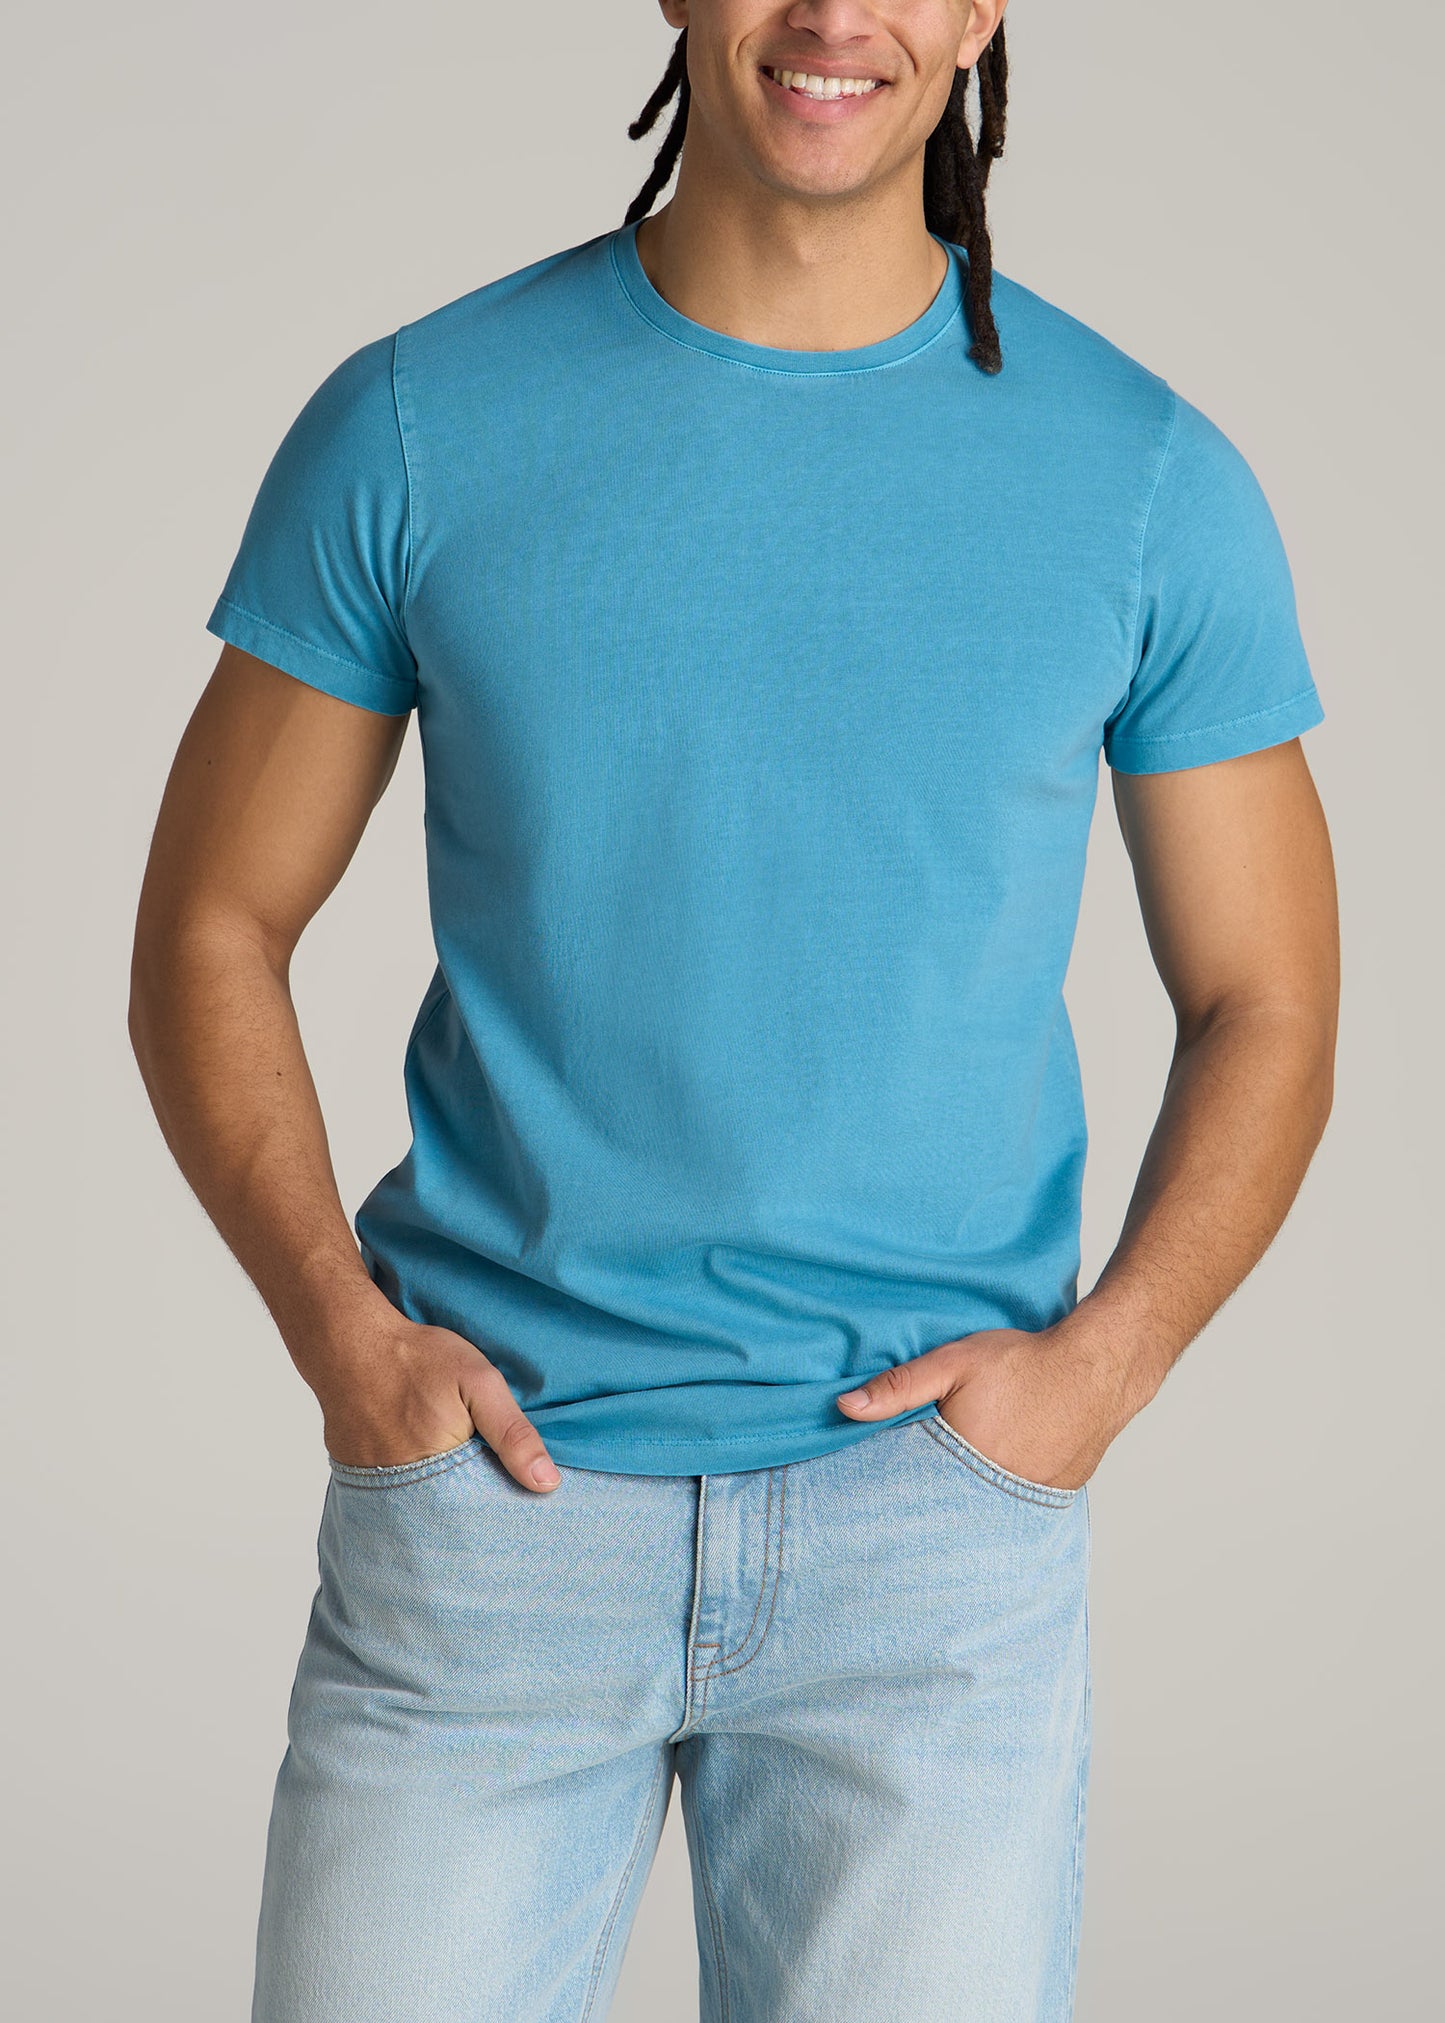 MODERN-FIT Garment Dyed Cotton Men's Tall T-Shirt in Turquoise Splash